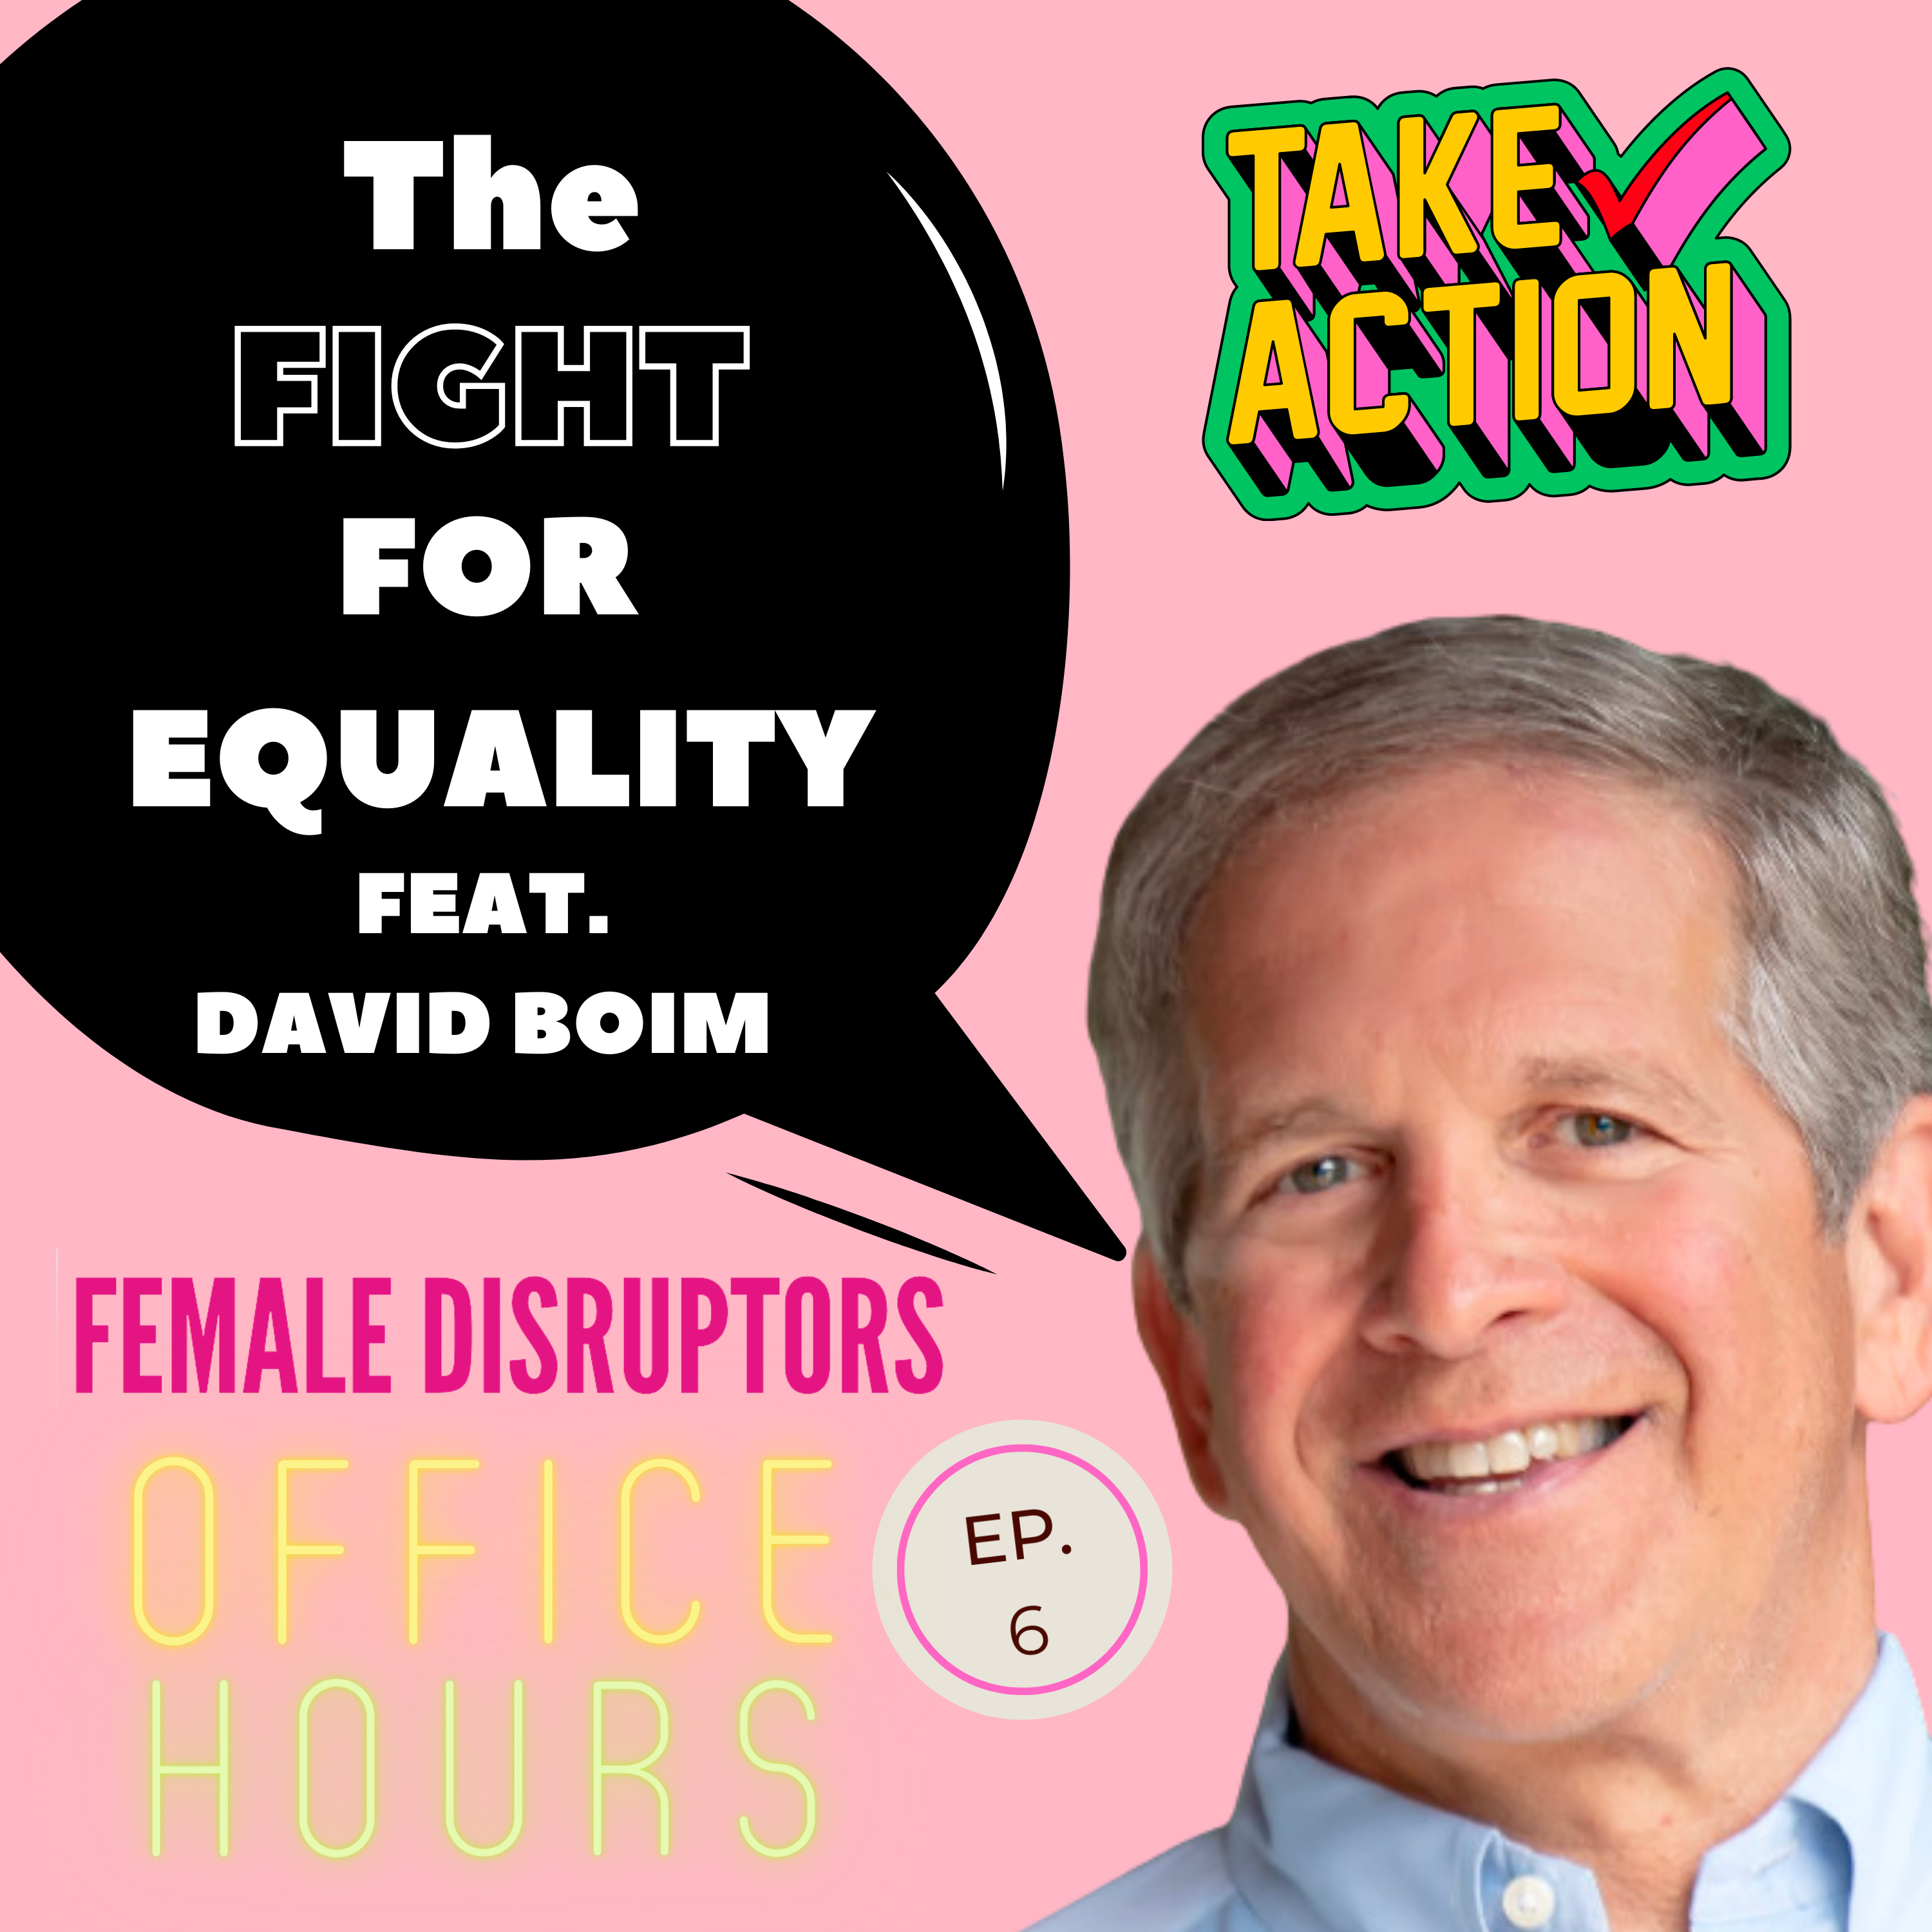 The Fight For Equality! Activist David Boim Shares Historical POV and What Needs to Happen